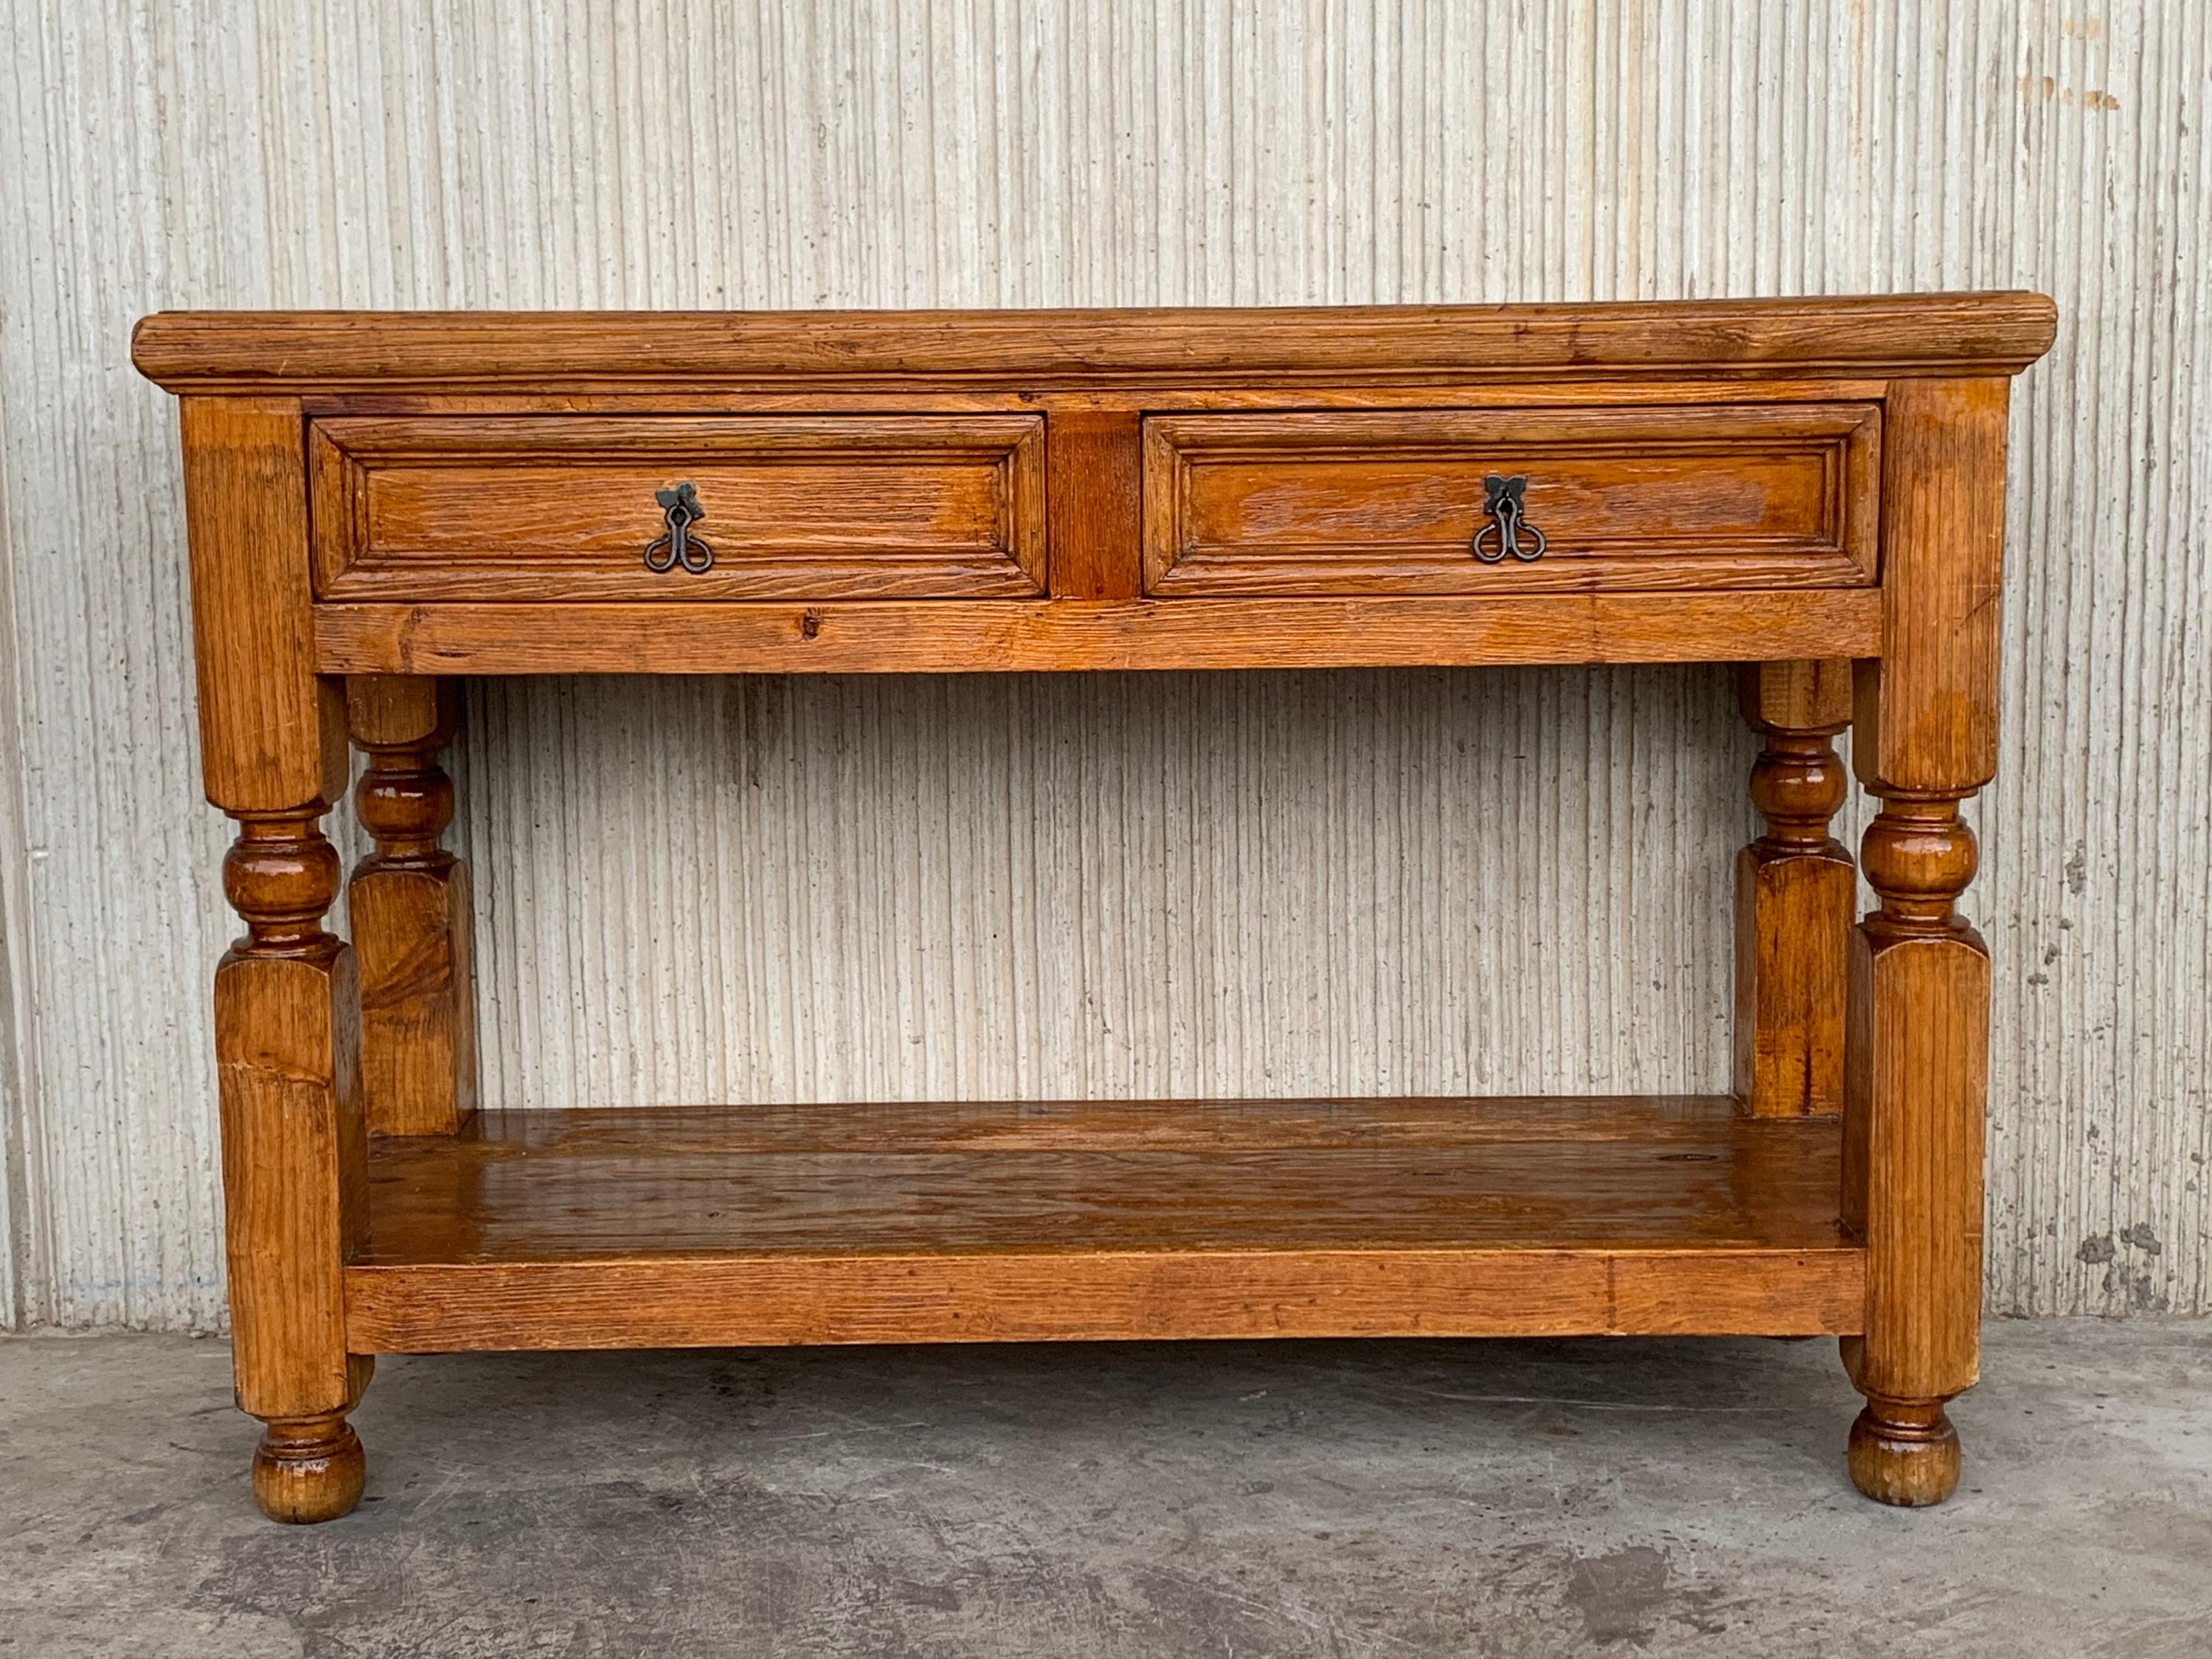 Two-drawer French pine console - side table. Practical French side table with two drawers and lower shelve. Good color throughout with good detail and original iron handles.

Measure: Low shelve 7.28in.